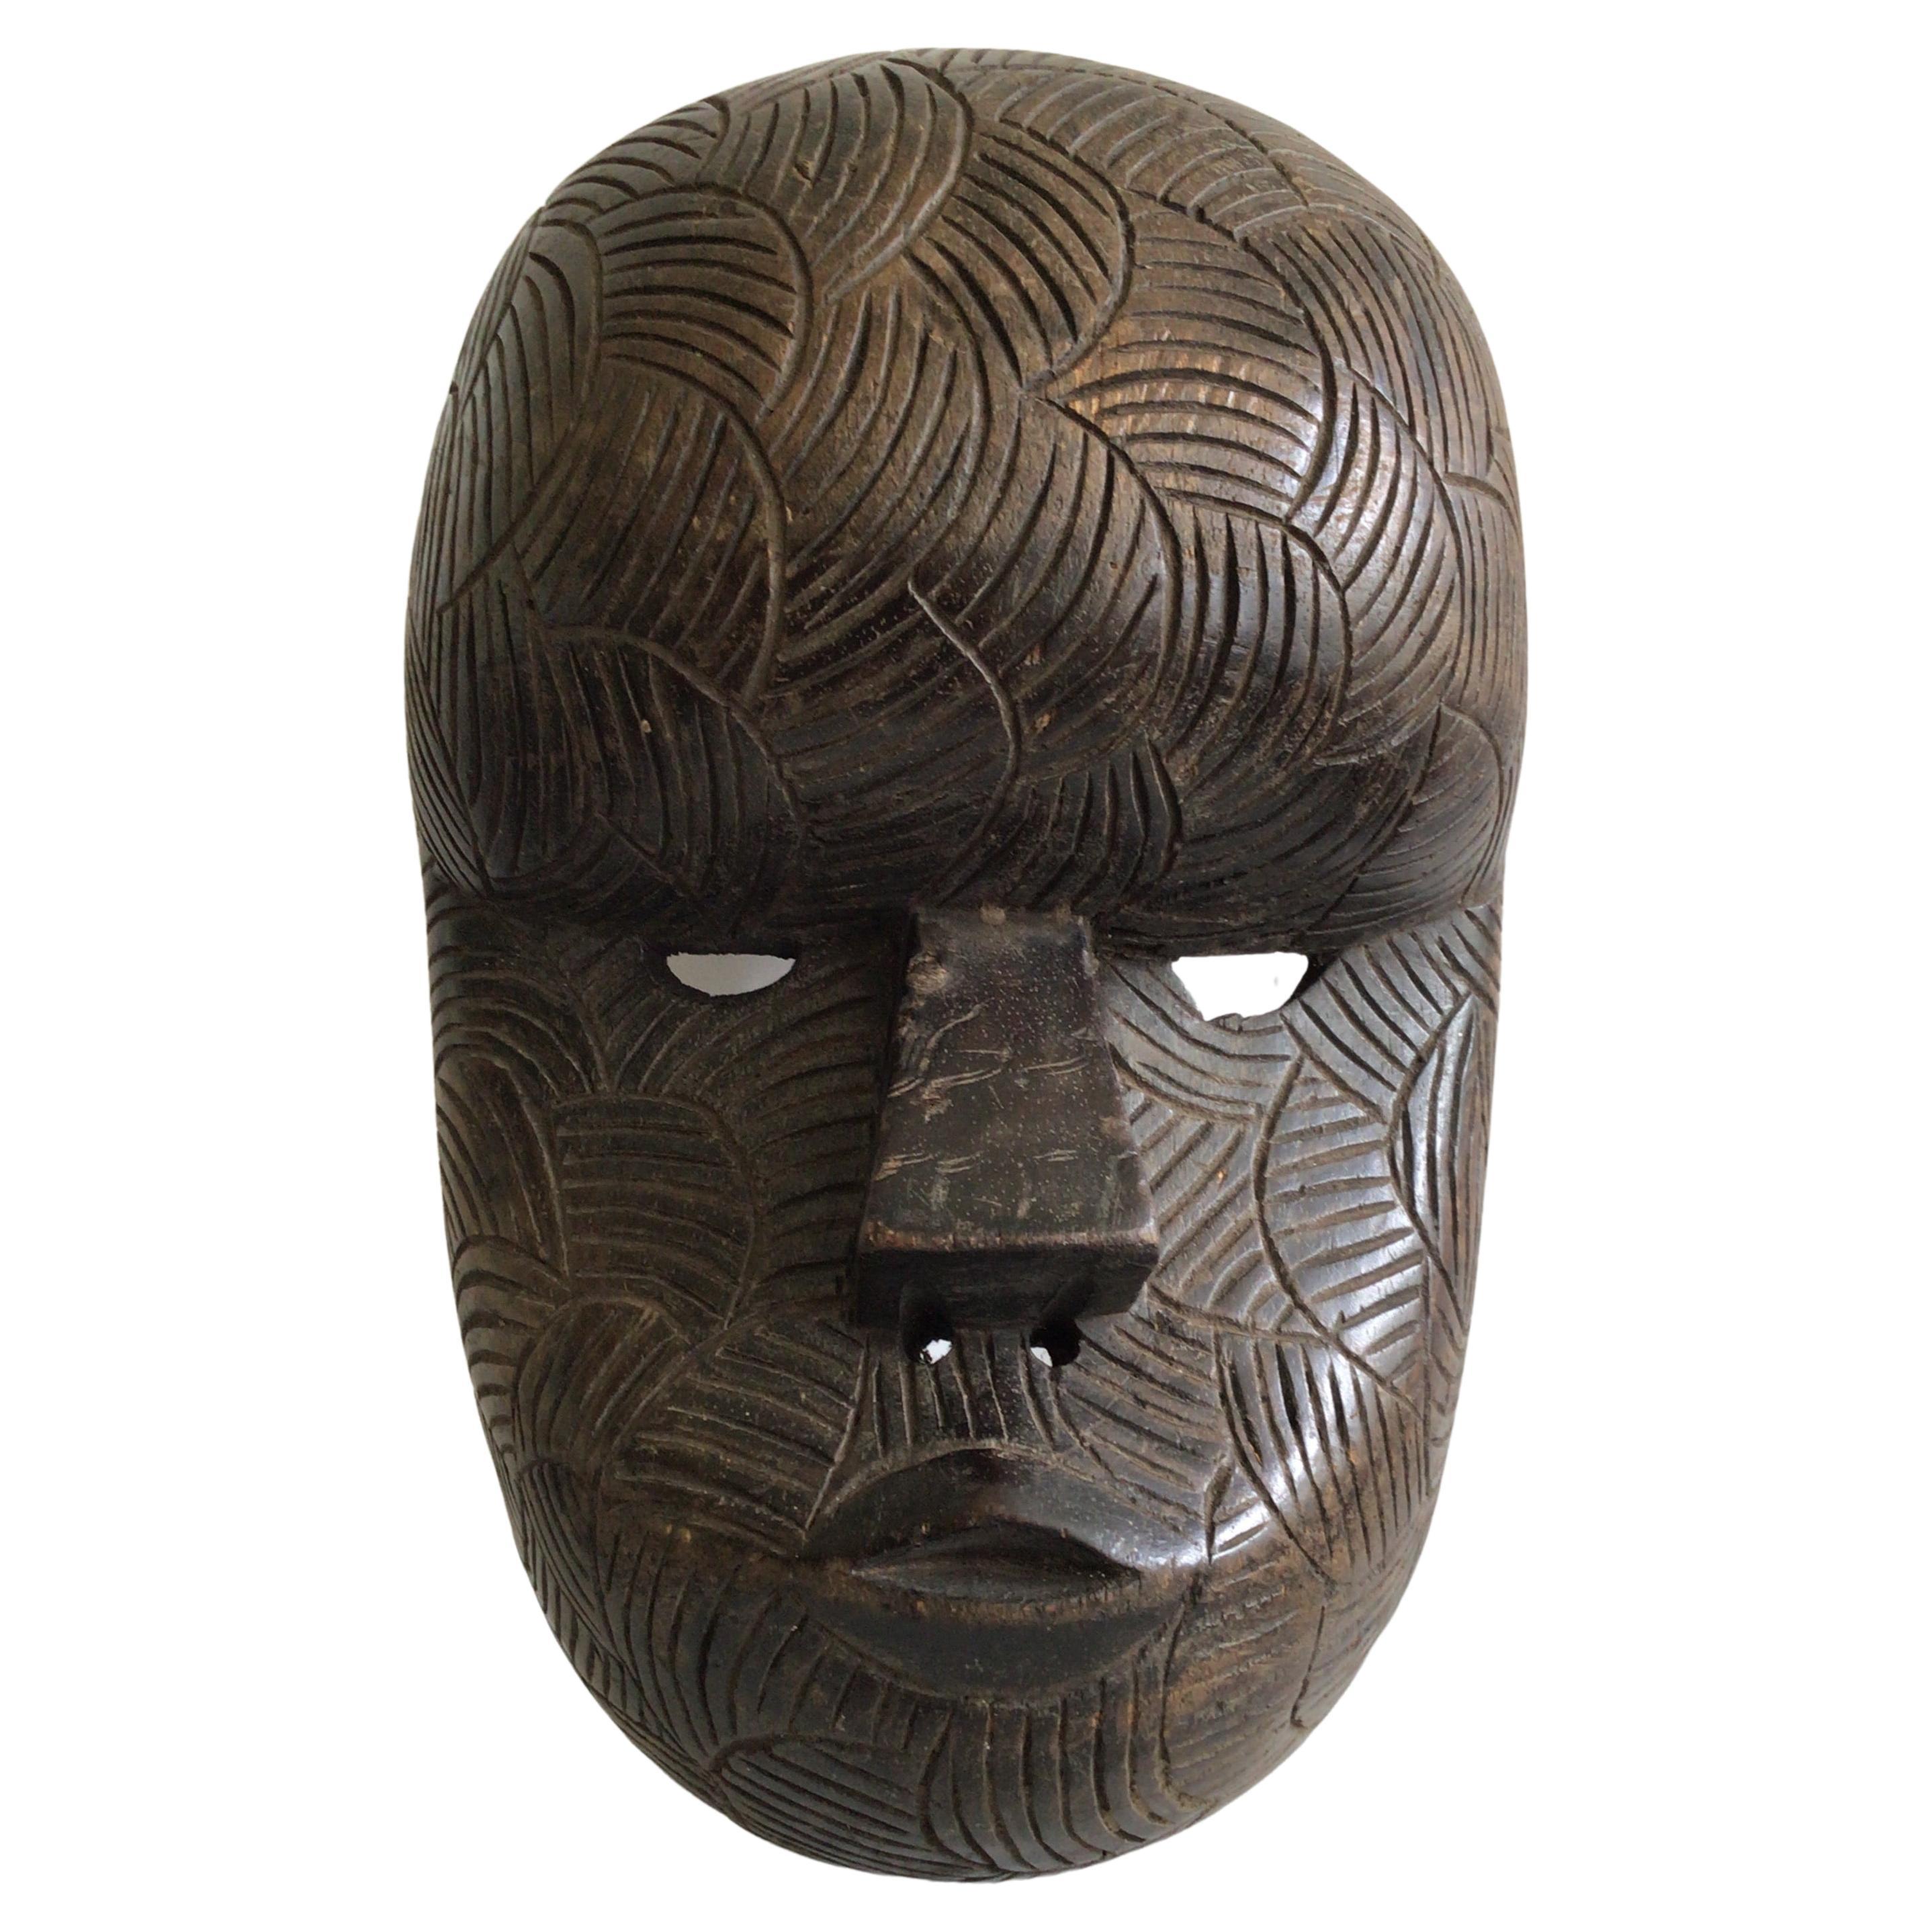 1950s Carved Wood African Mask